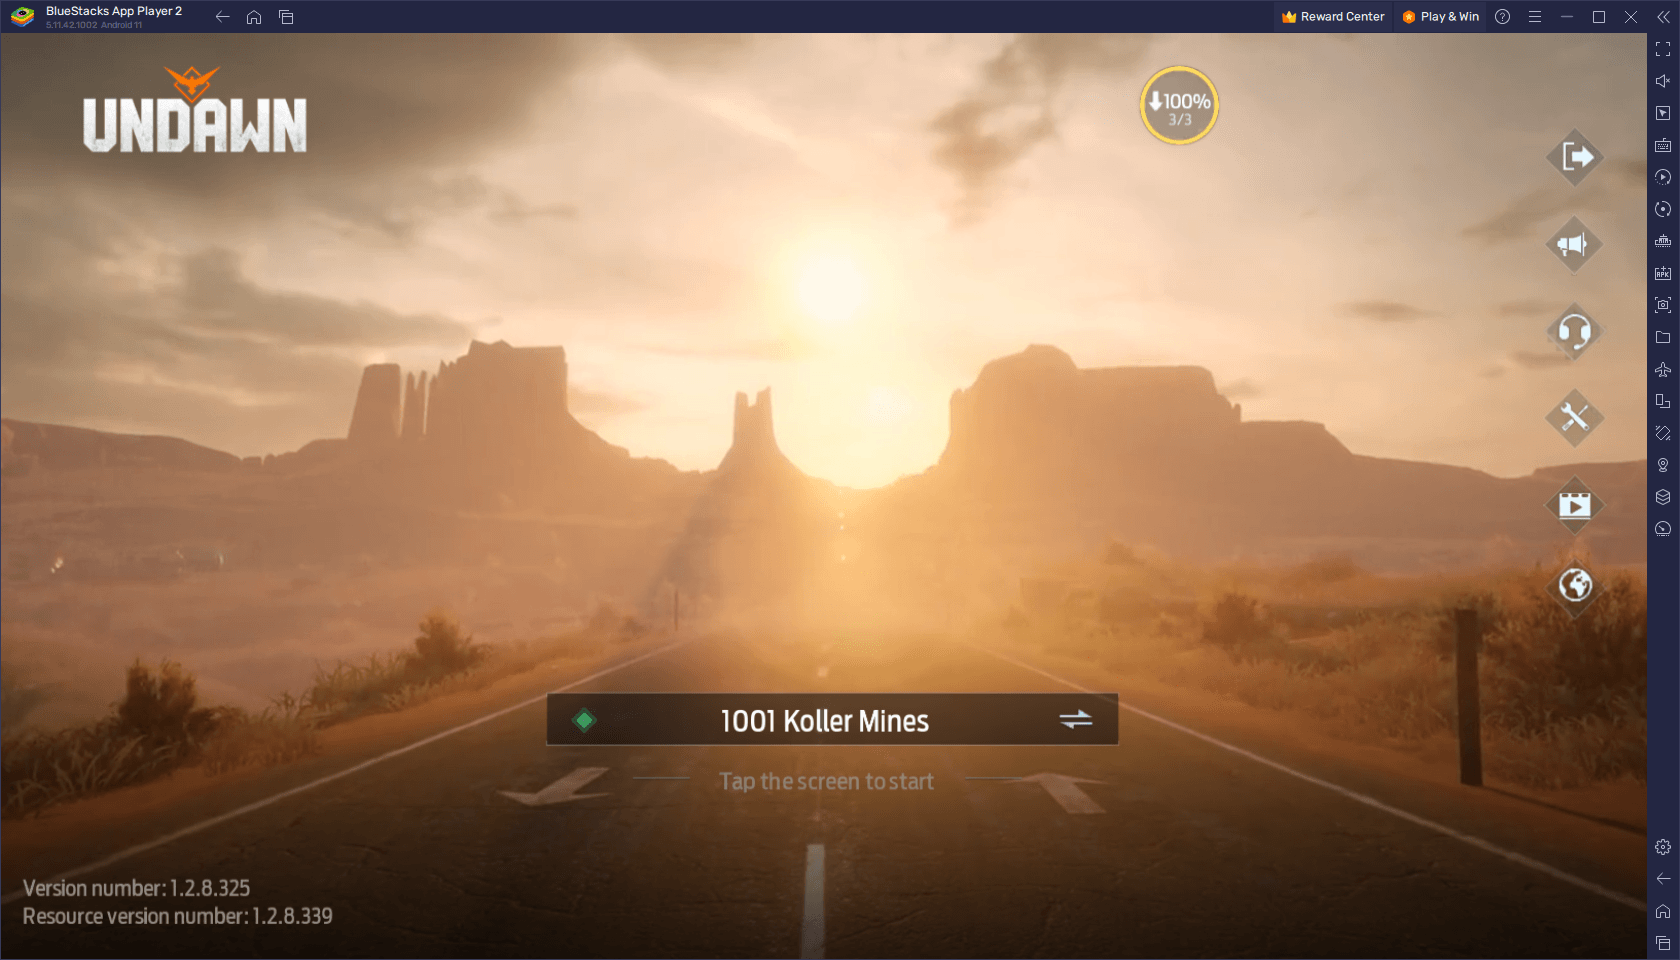 Undawn BlueStacks Optimization Guide: Enhance Your Gaming Experience on PC